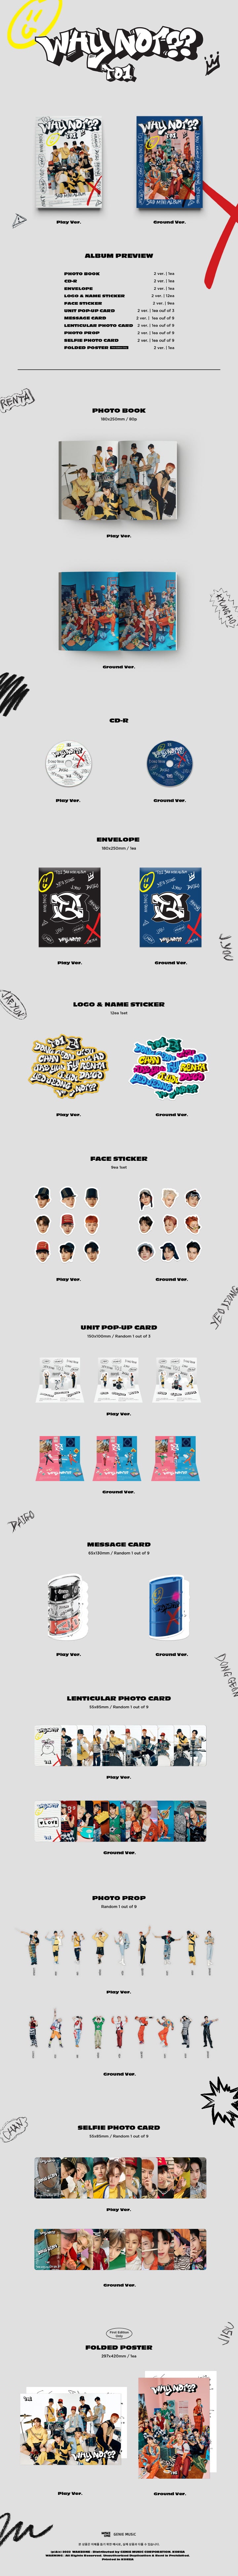 1 CD
1 Photo Book (80 pages)
1 Envelope
1 Logo & Name Sticker Set (12 stickers)
1 Face Sticker Set (9 stickers)
1 Unit Pop...